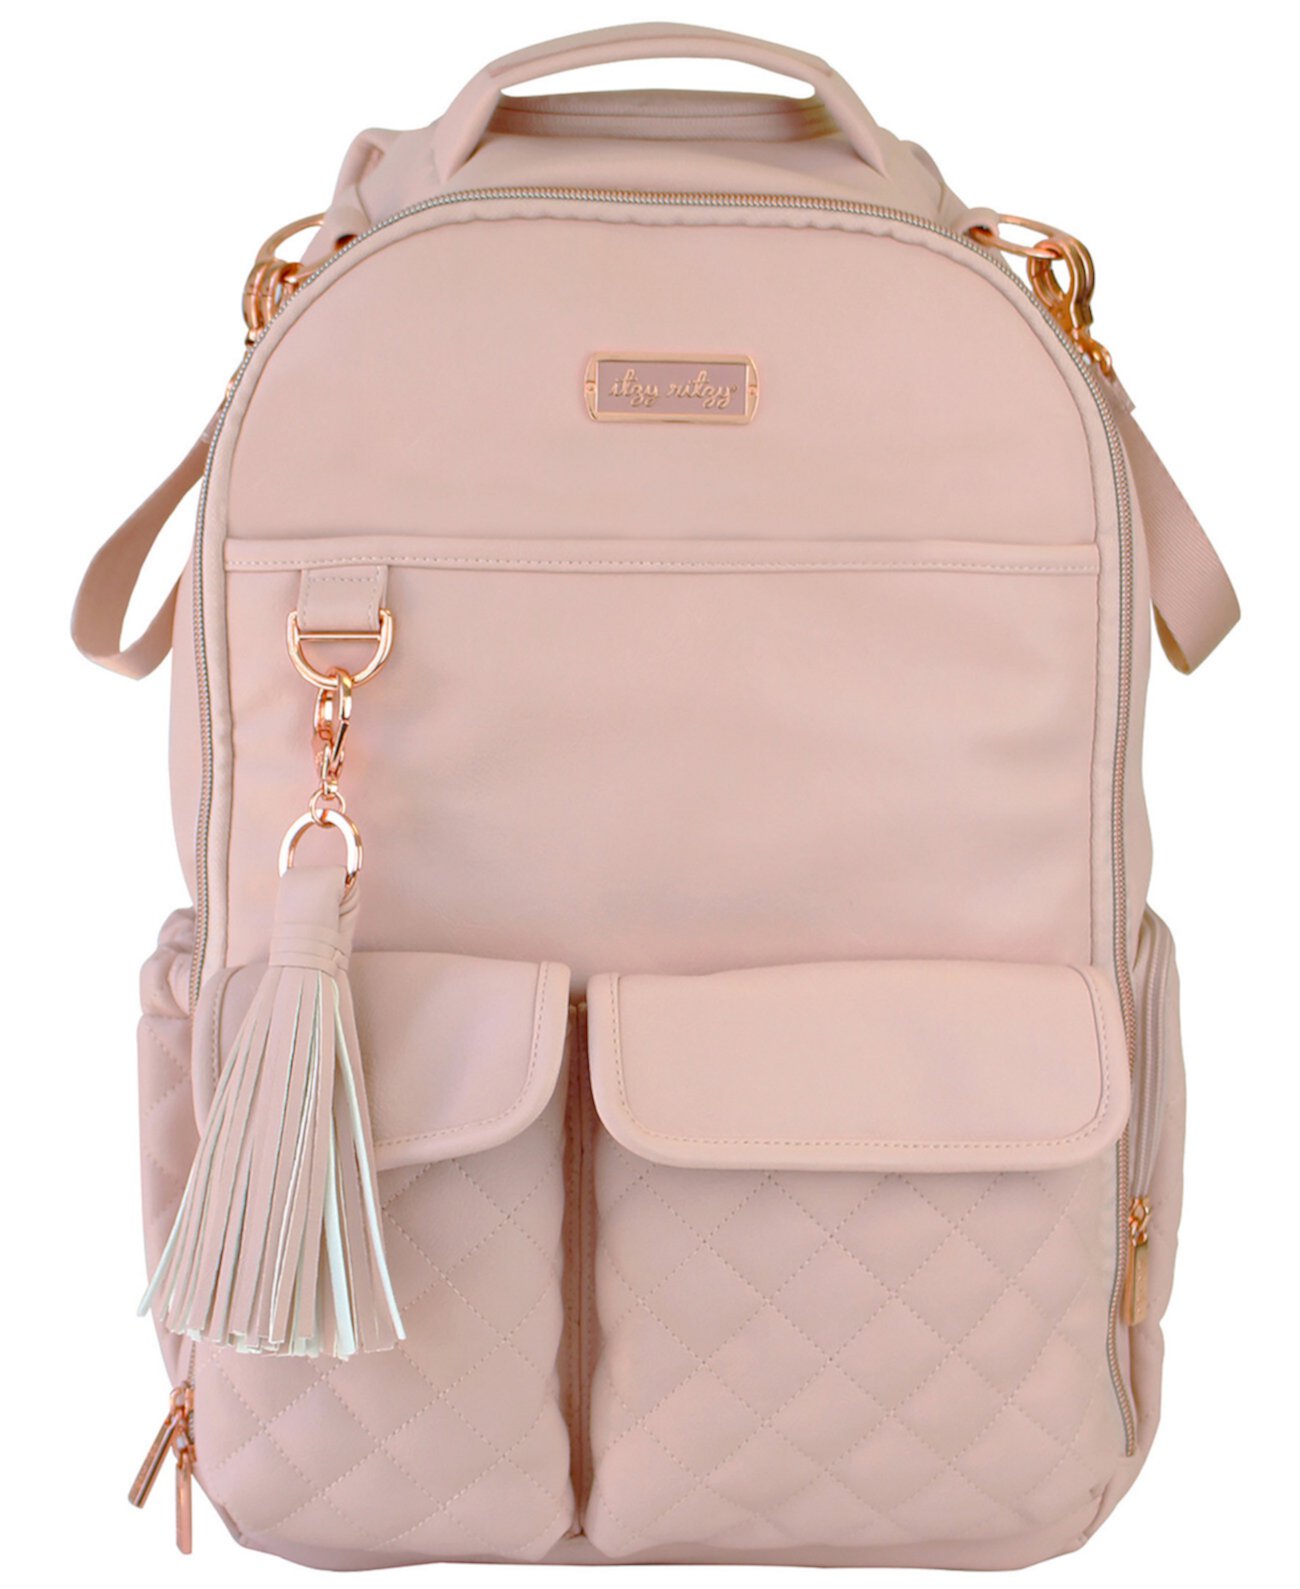 Boss Backpack Diaperbag- Черная елочка Itzy Ritzy